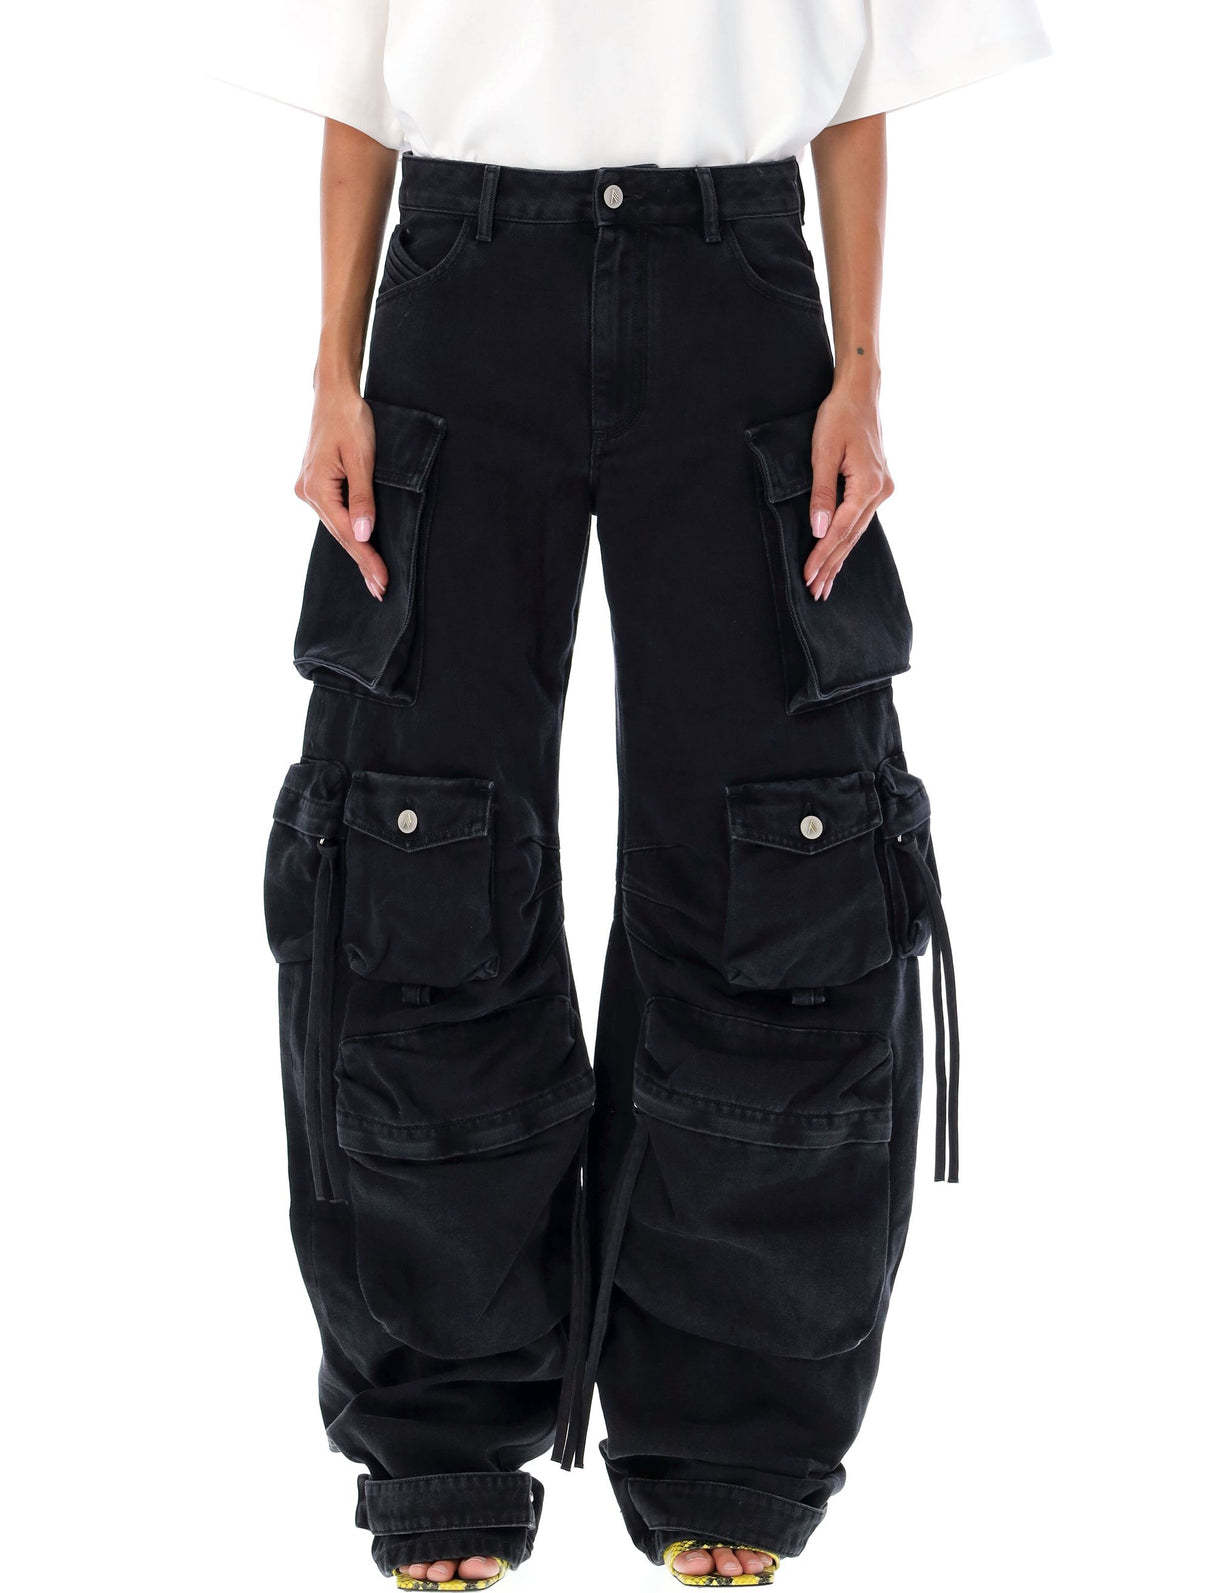 THE ATTICO Stained Black Camouflage Long Pants for Women